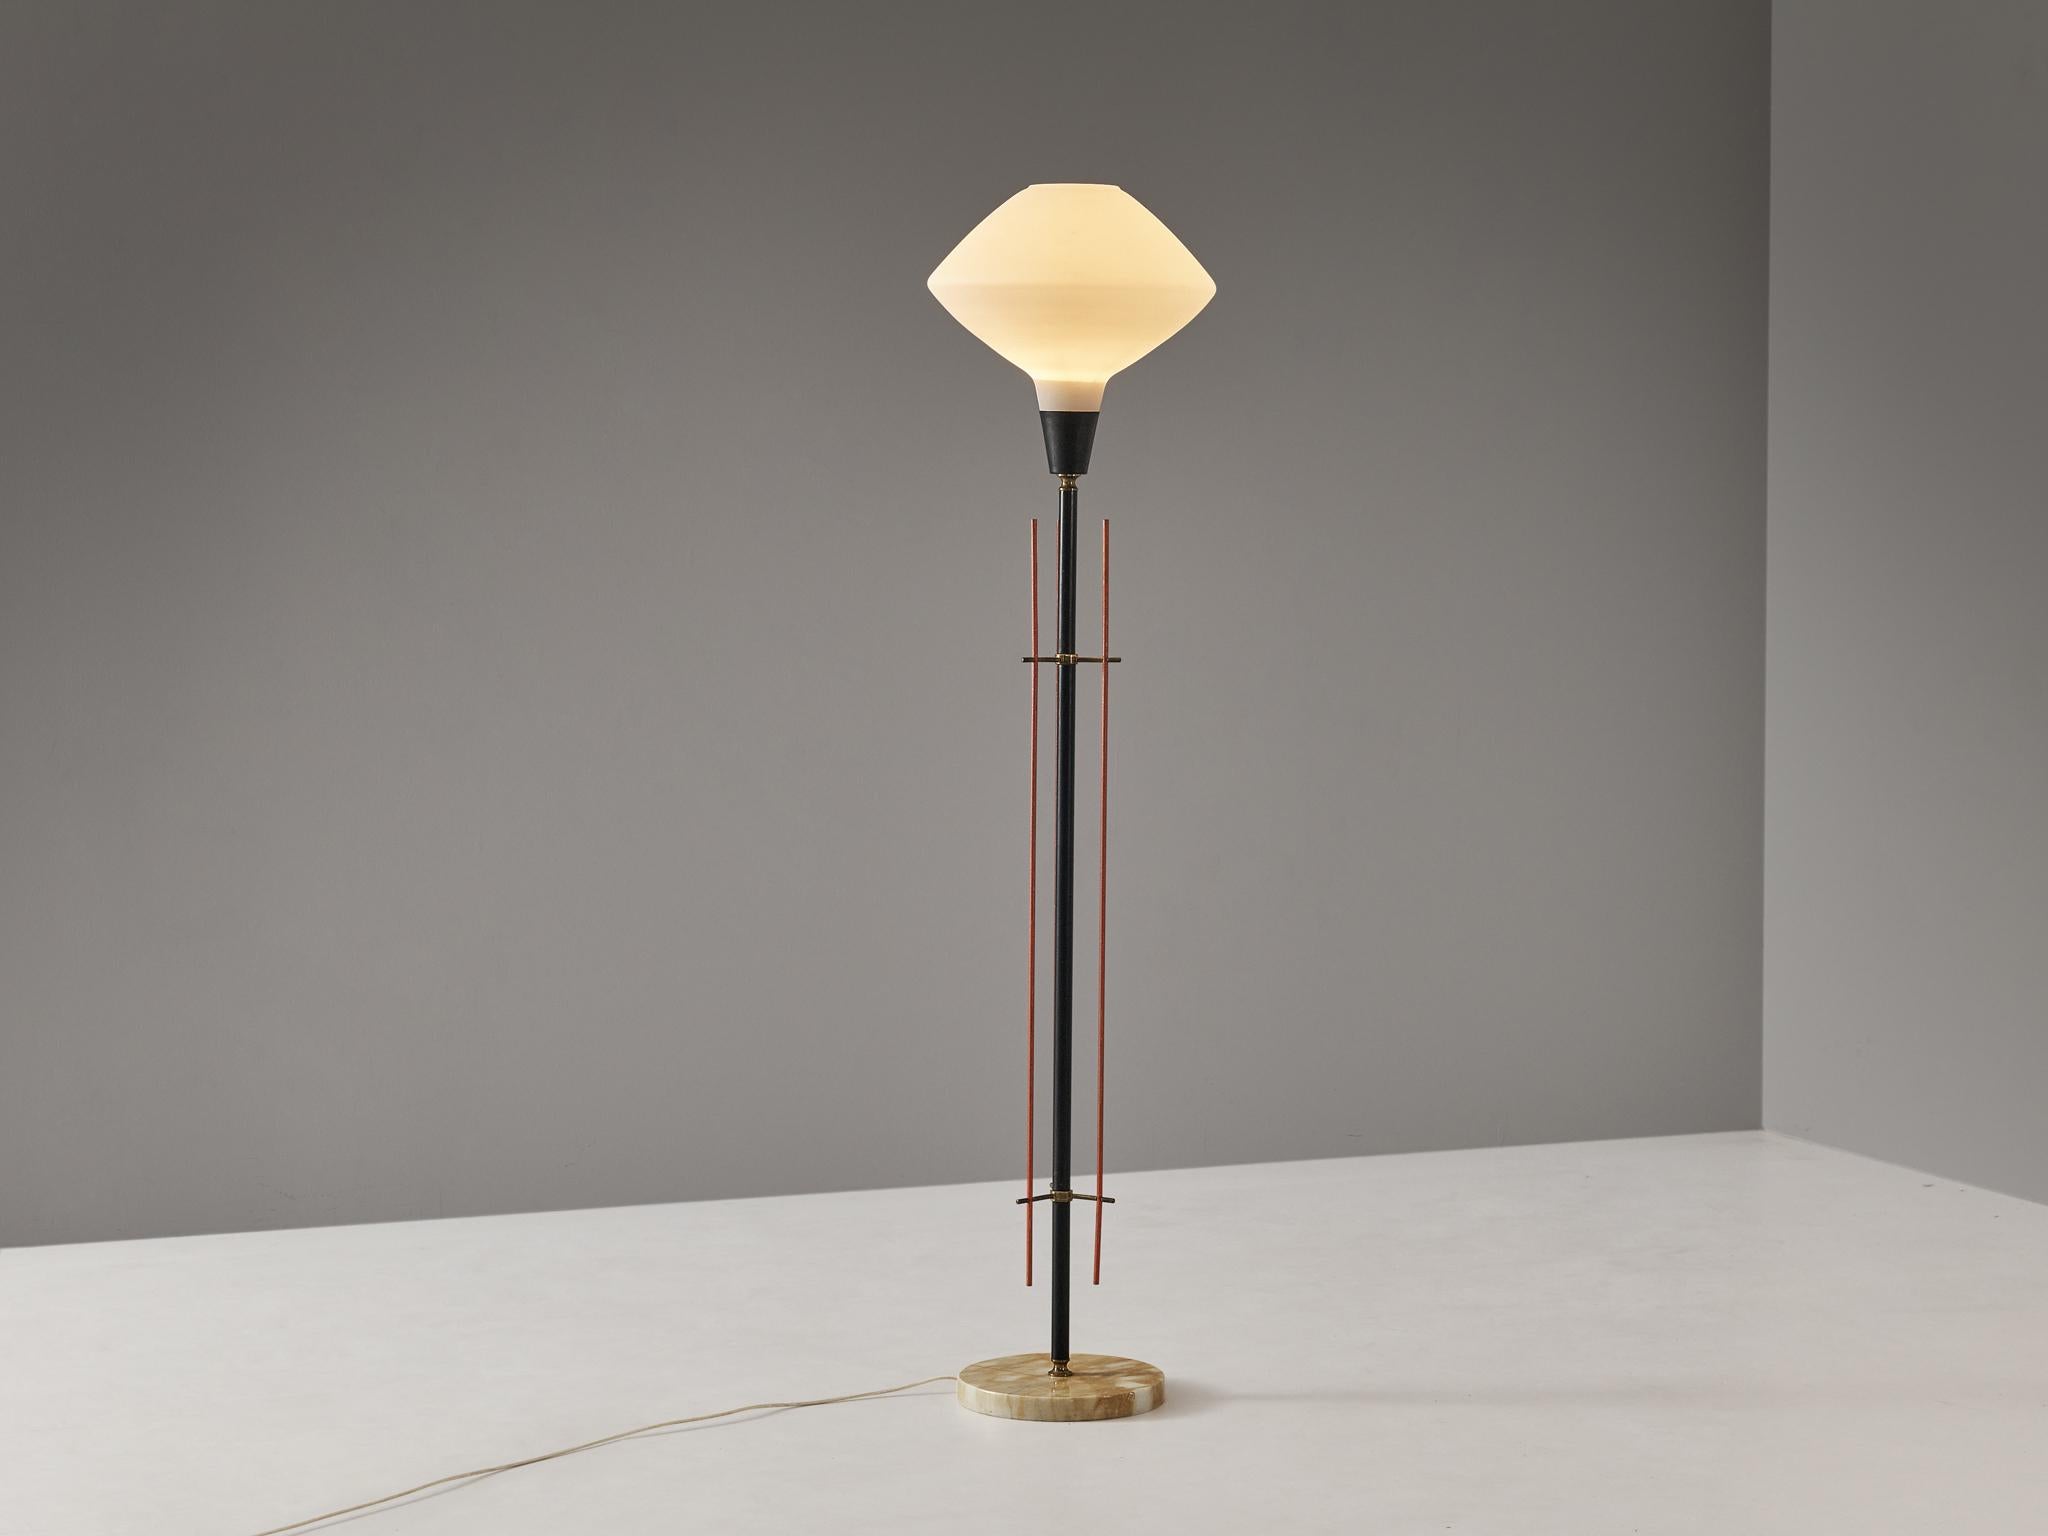 Floor lamp, lacquered metal, brass, marble, Italy, 1960s

This elegant floor lamp is made in Italy in the 1960s. The design of this piece convinces easily through the use of materials and color combinations. The red detailing around the rod in